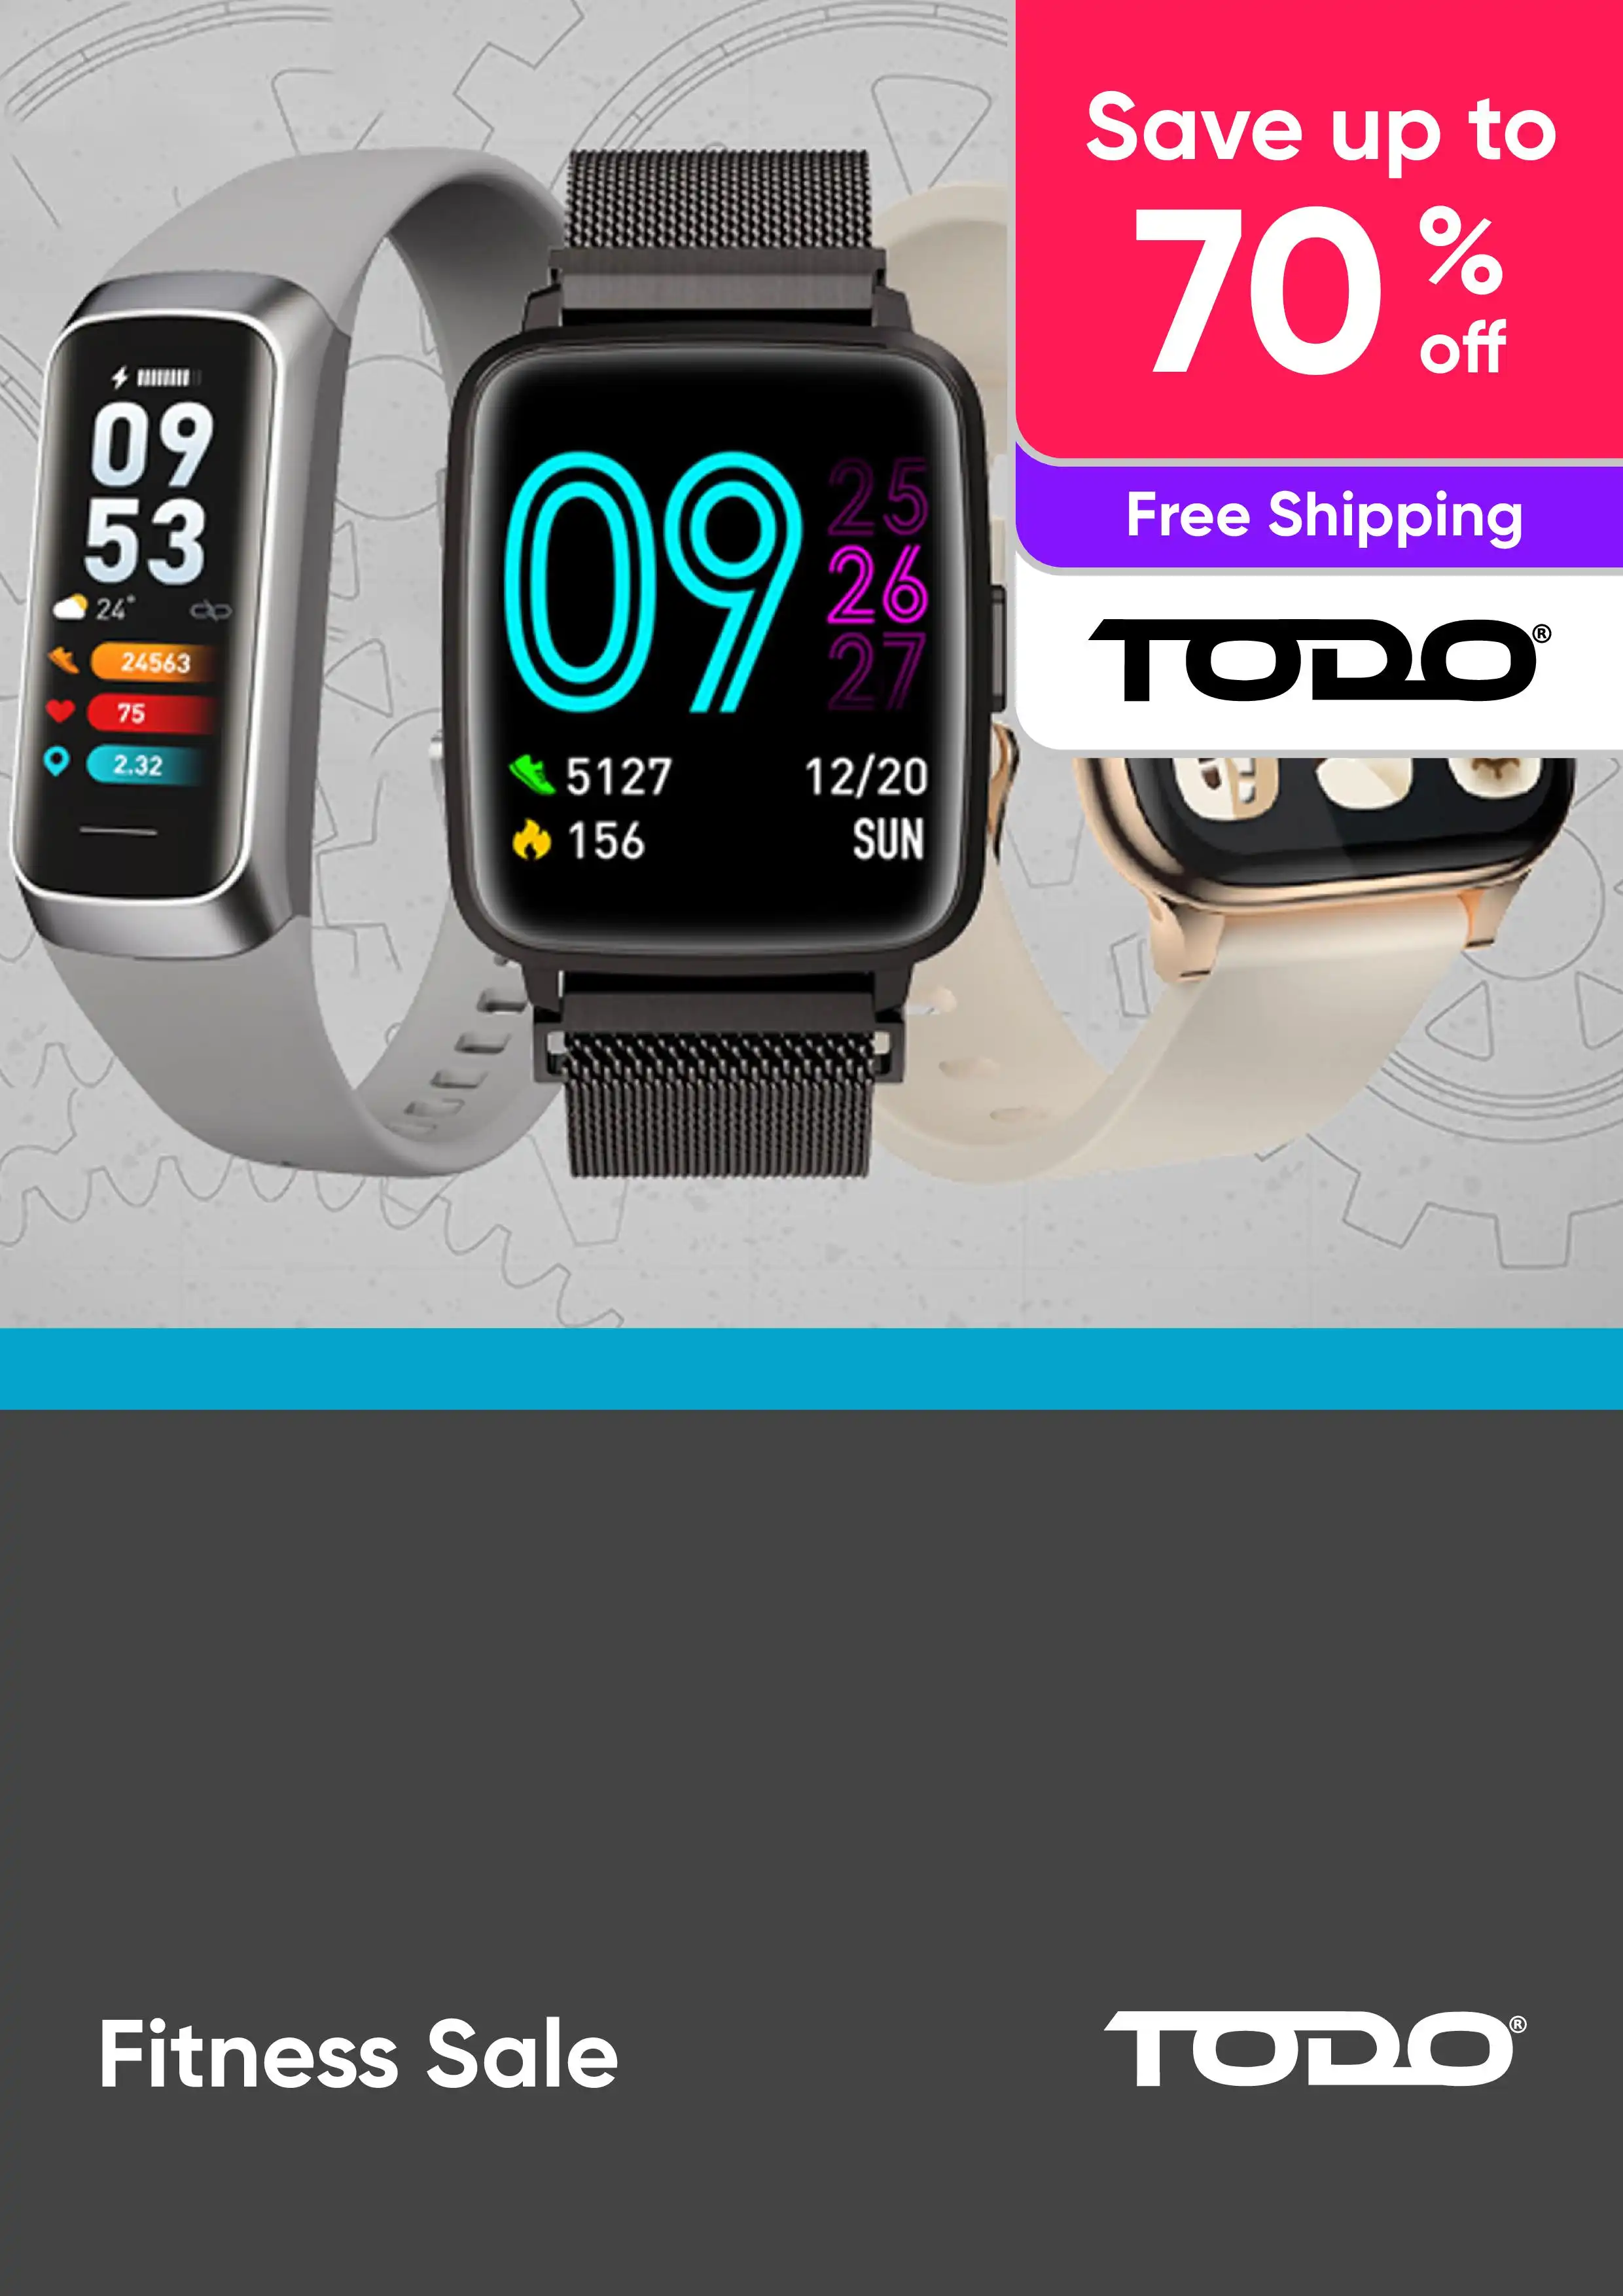 Fitness Sale - Smart Watches, Thermometers, Fitness Bands - Up to 70% Off